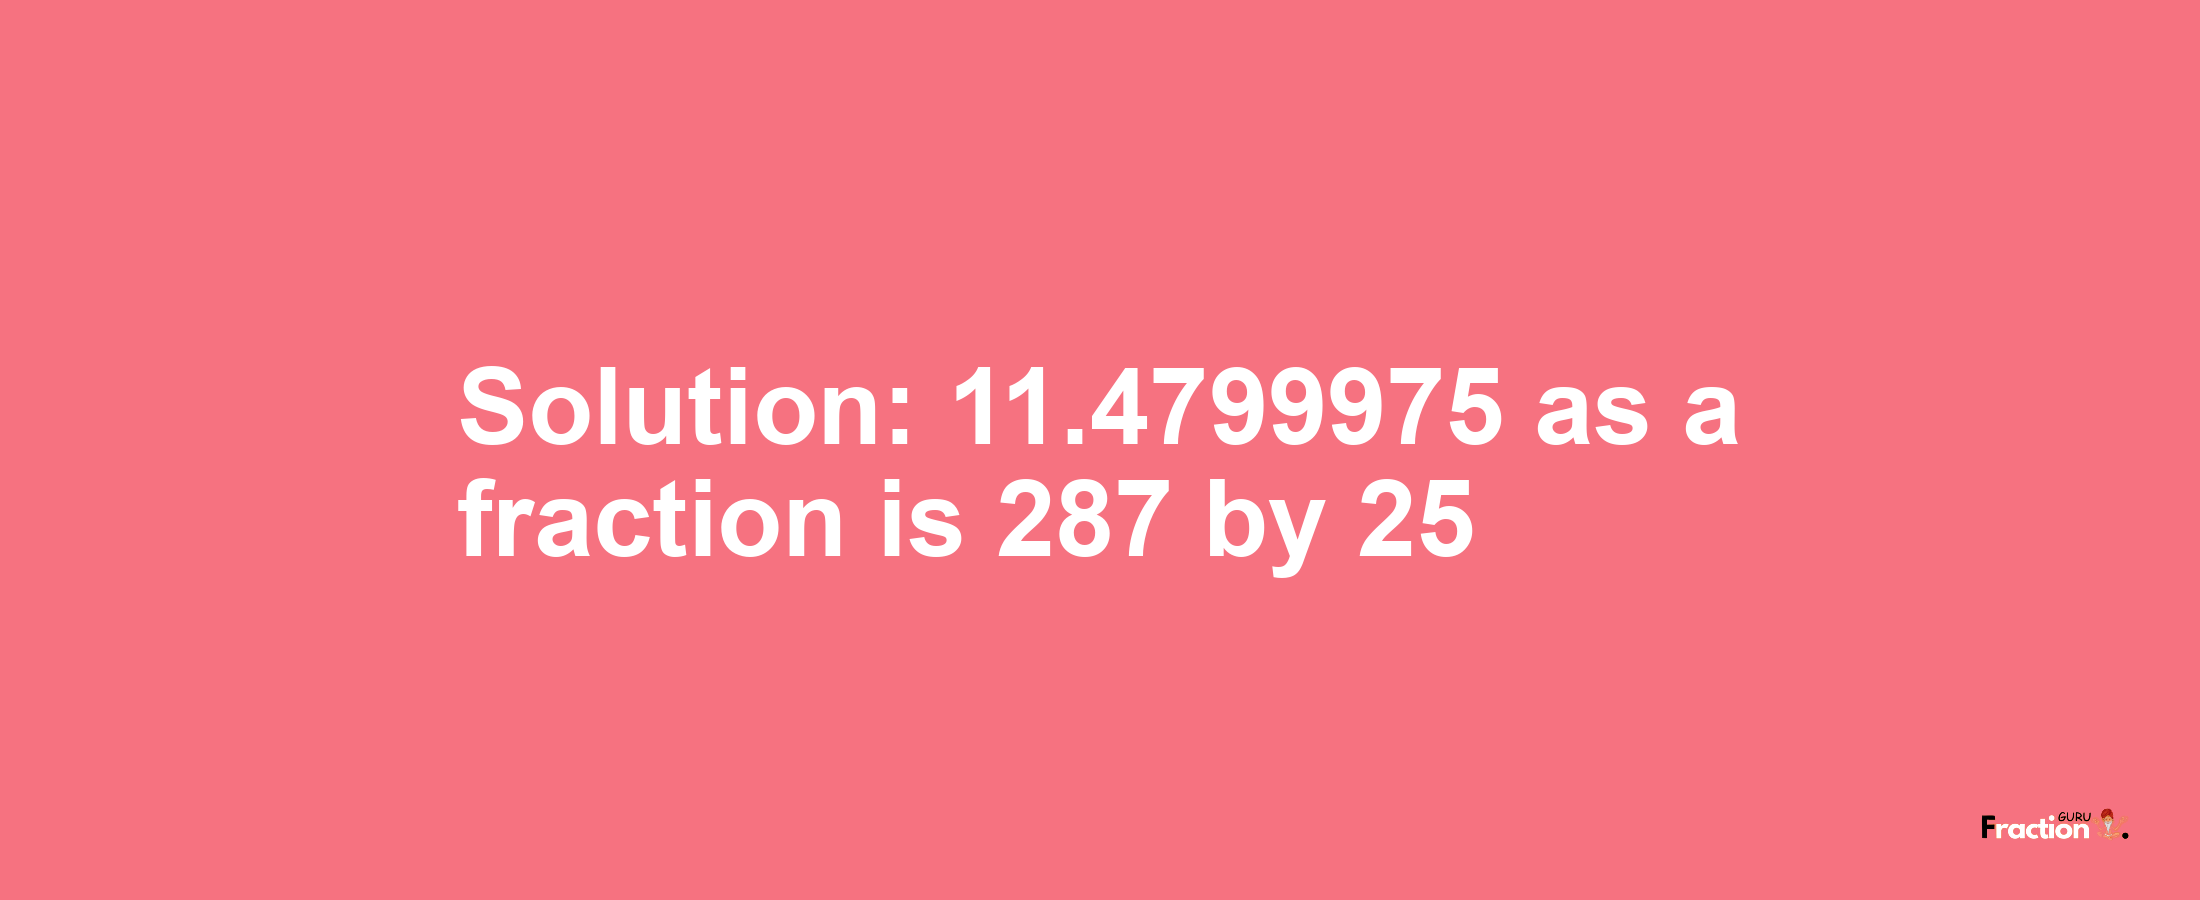 Solution:11.4799975 as a fraction is 287/25